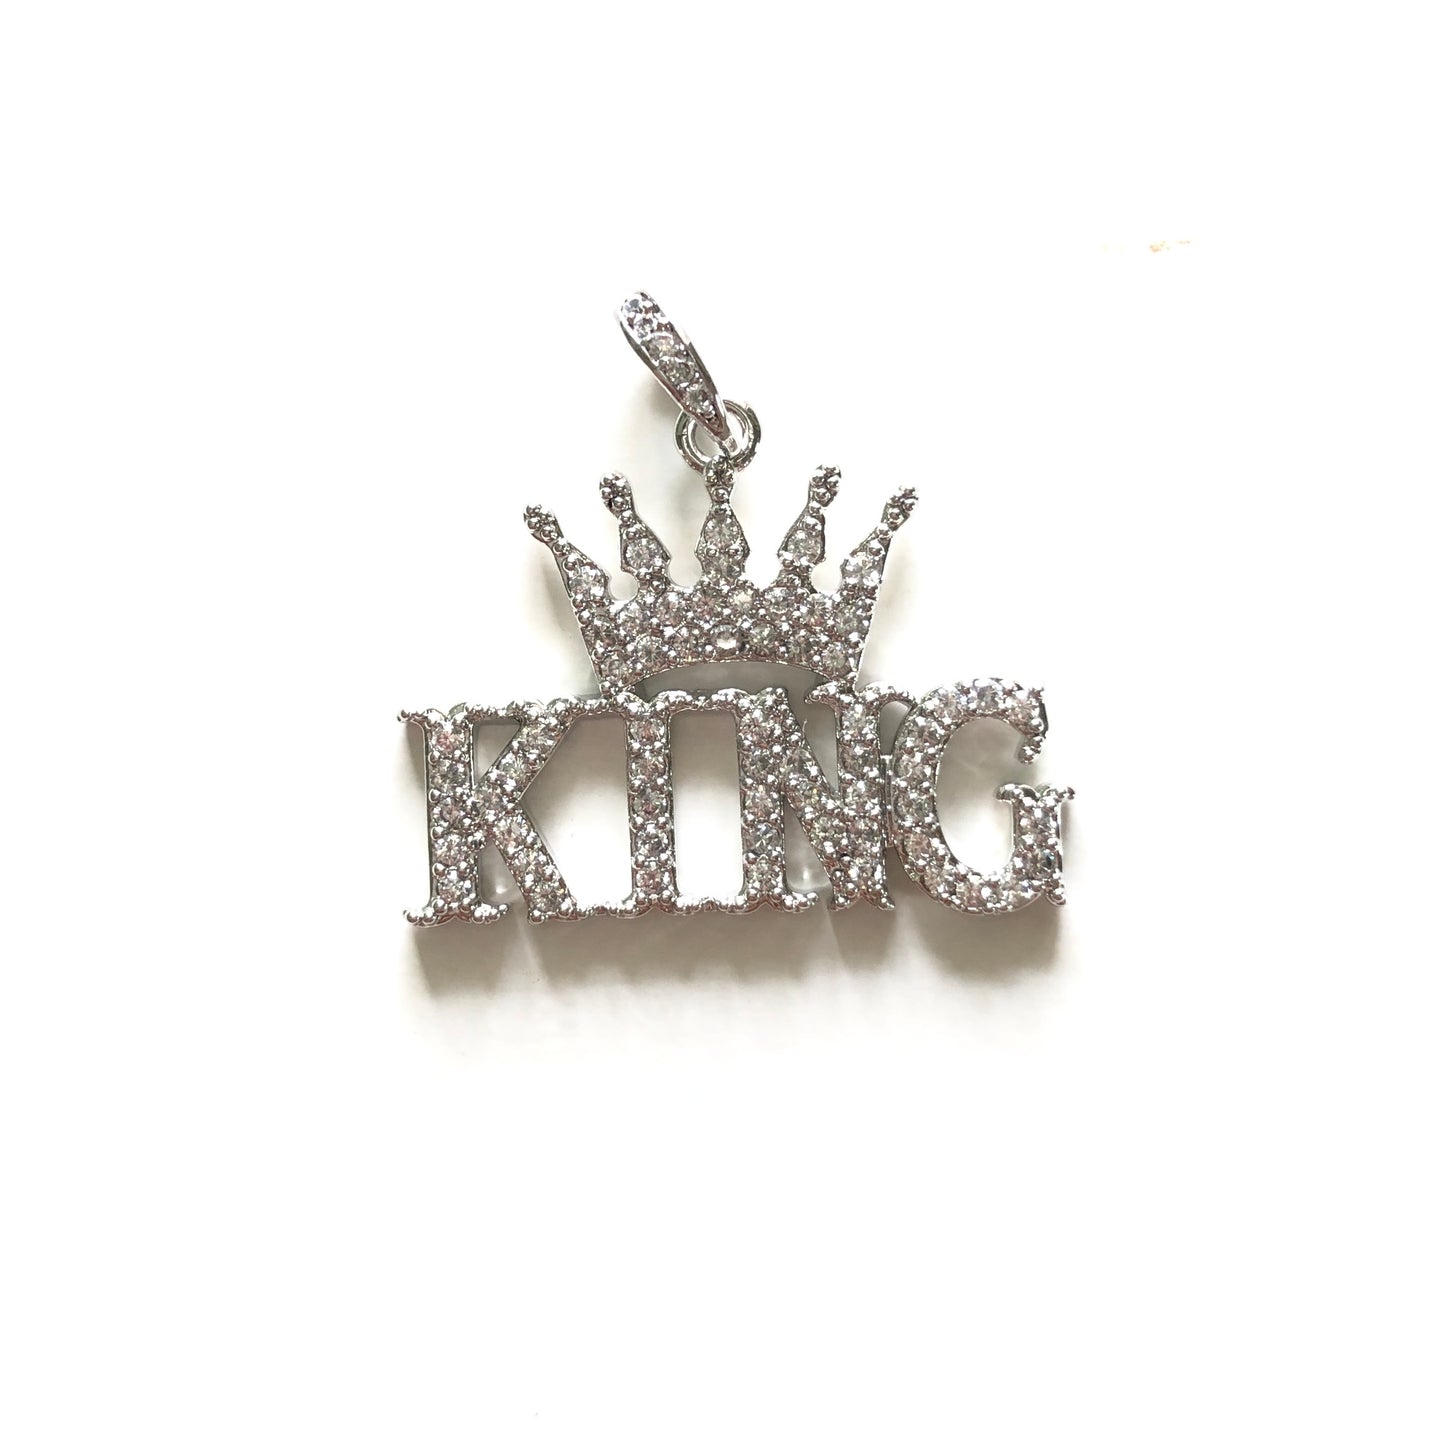 10pcs/lot 26mm*18 CZ Paved King Charms Silver CZ Paved Charms Words & Quotes Charms Beads Beyond